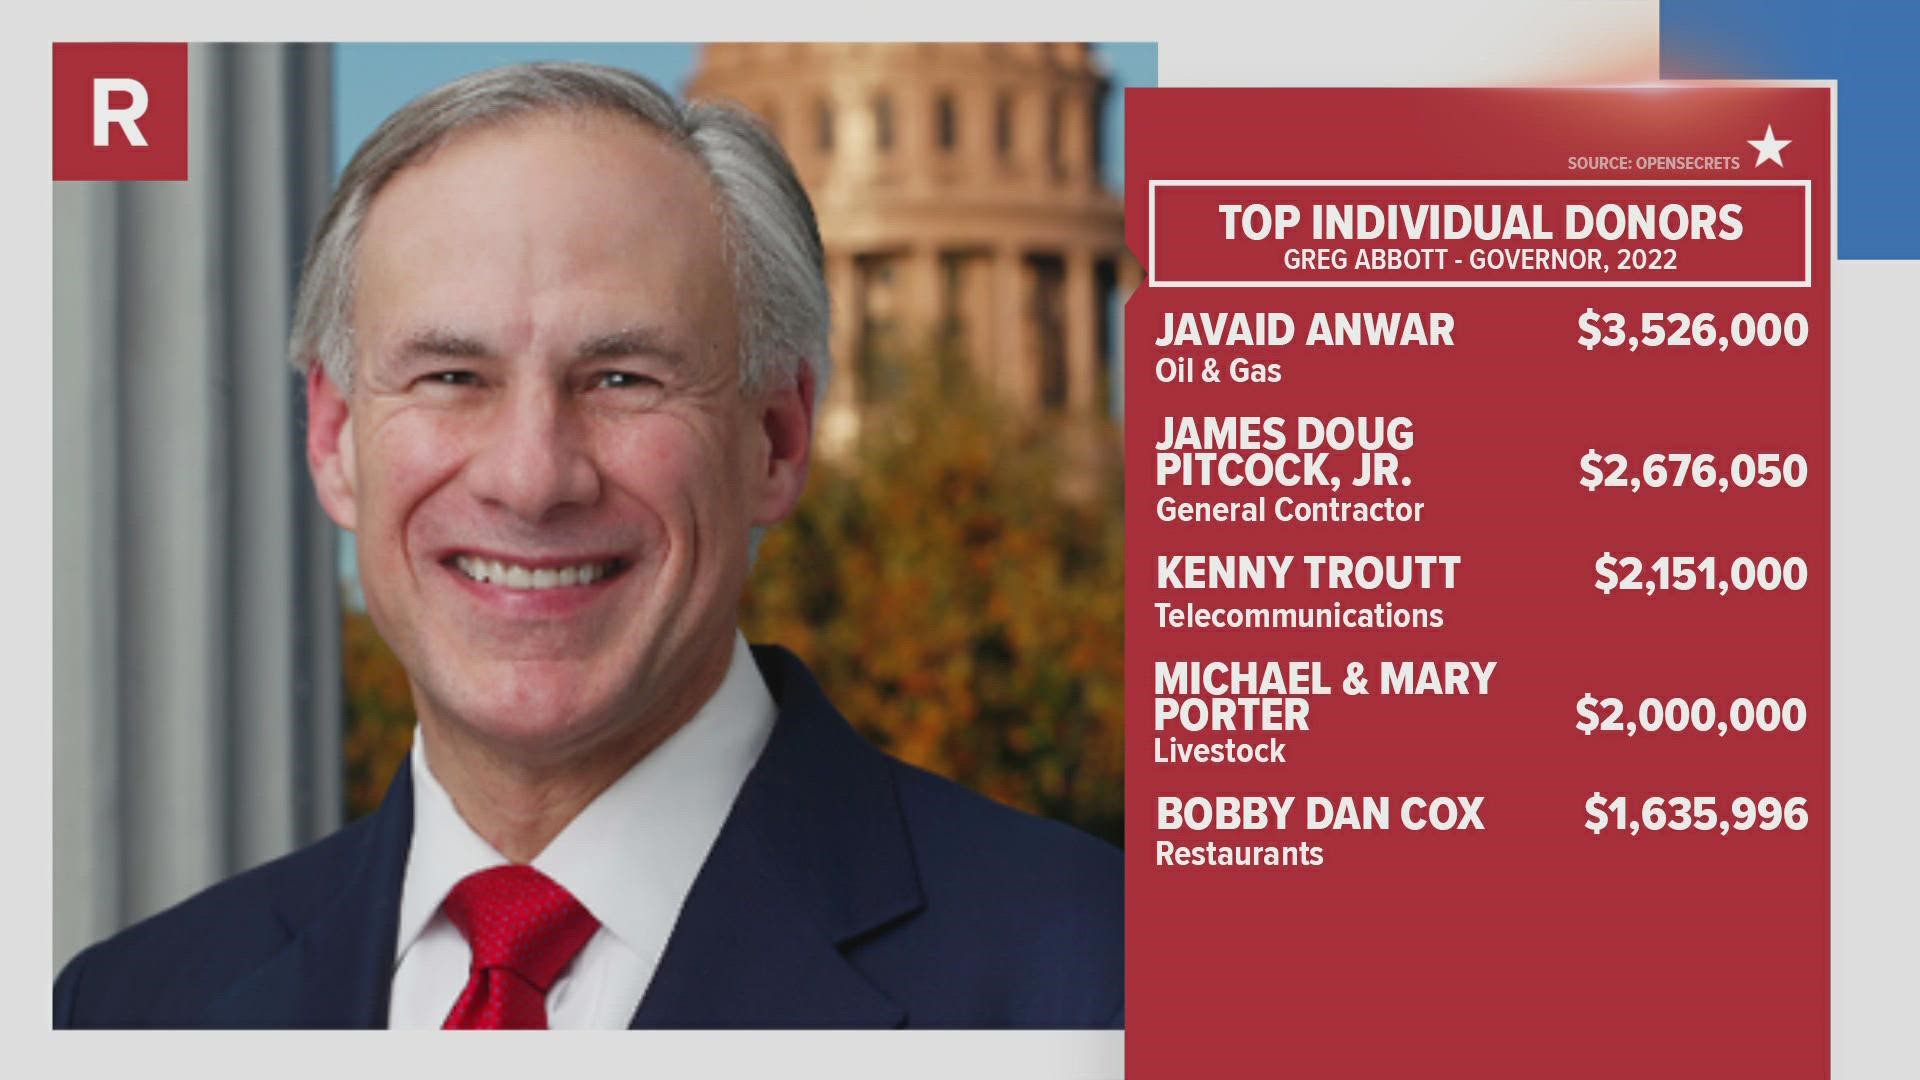 KVUE looked at who is giving the most to the state's top candidates. Here are the totals for the governor's race.